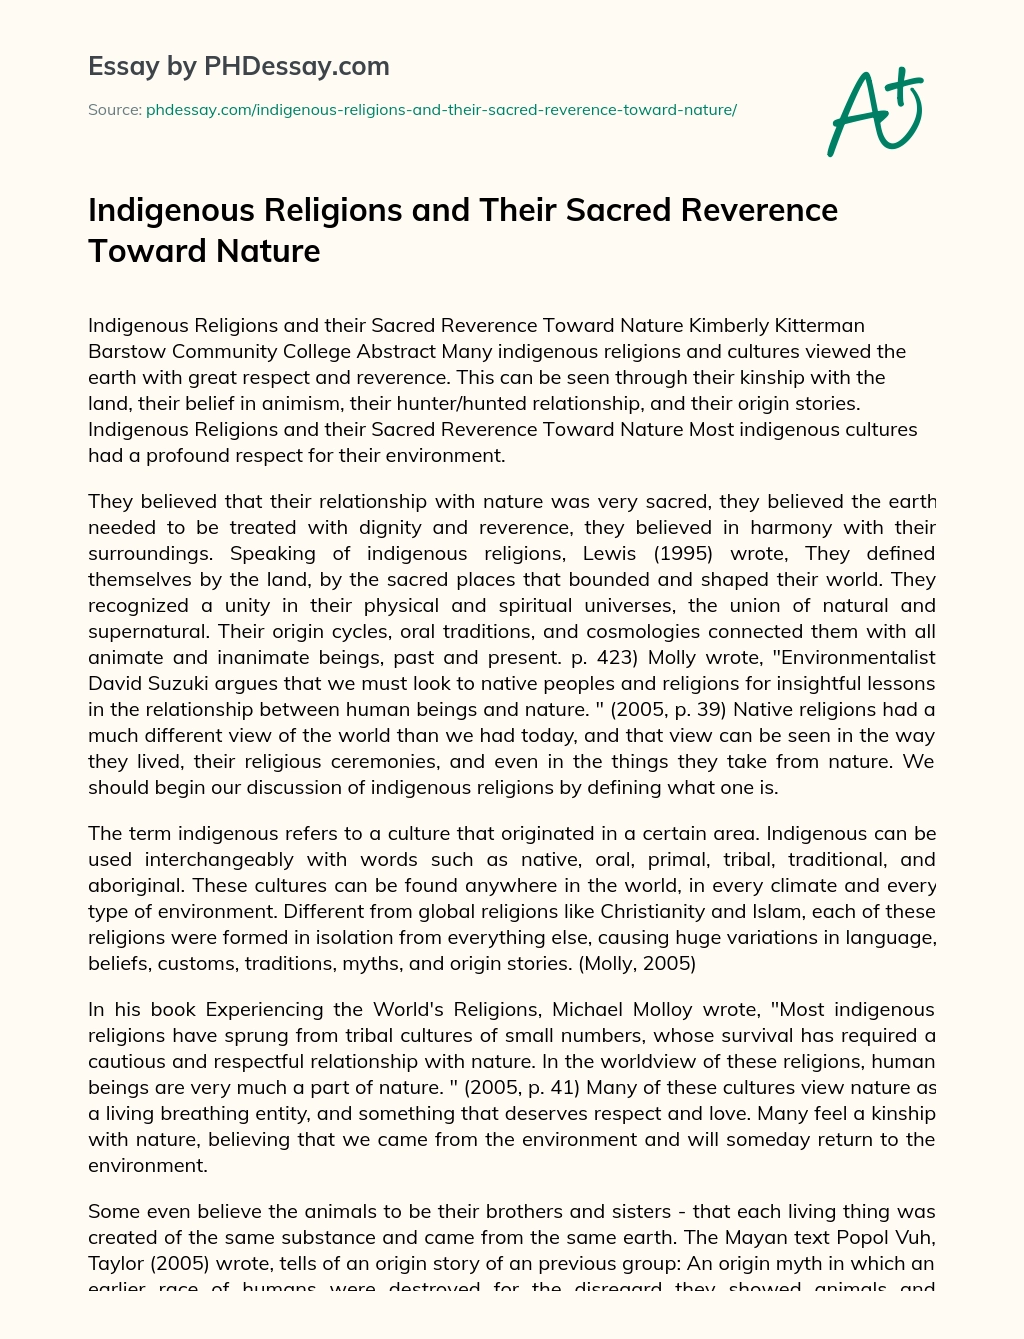 Indigenous Religions and Their Sacred Reverence Toward Nature essay